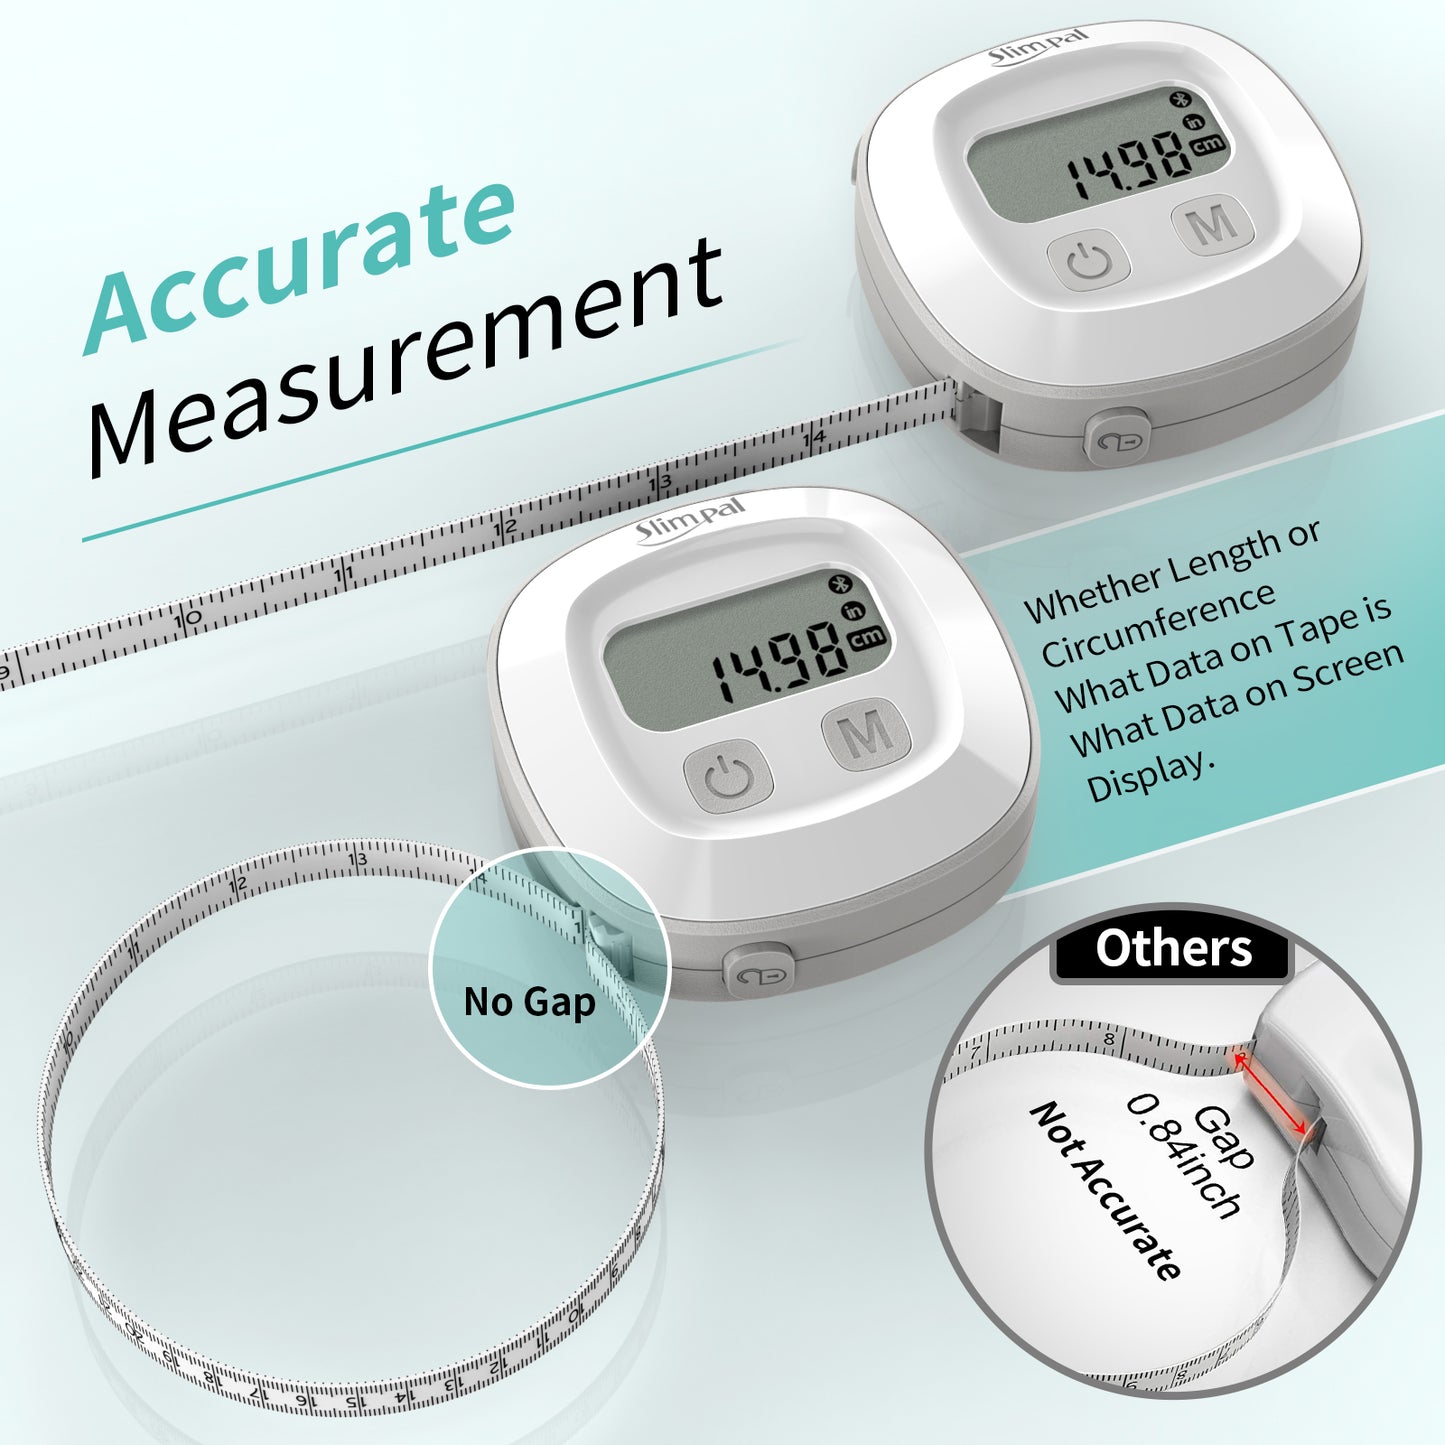 Slimpal Body Fat Tape Measure, Bluetooth Digital Smart Body Tape Measure  with LED Display, Retractable Measuring Tape for Fitness, Bodybuilding